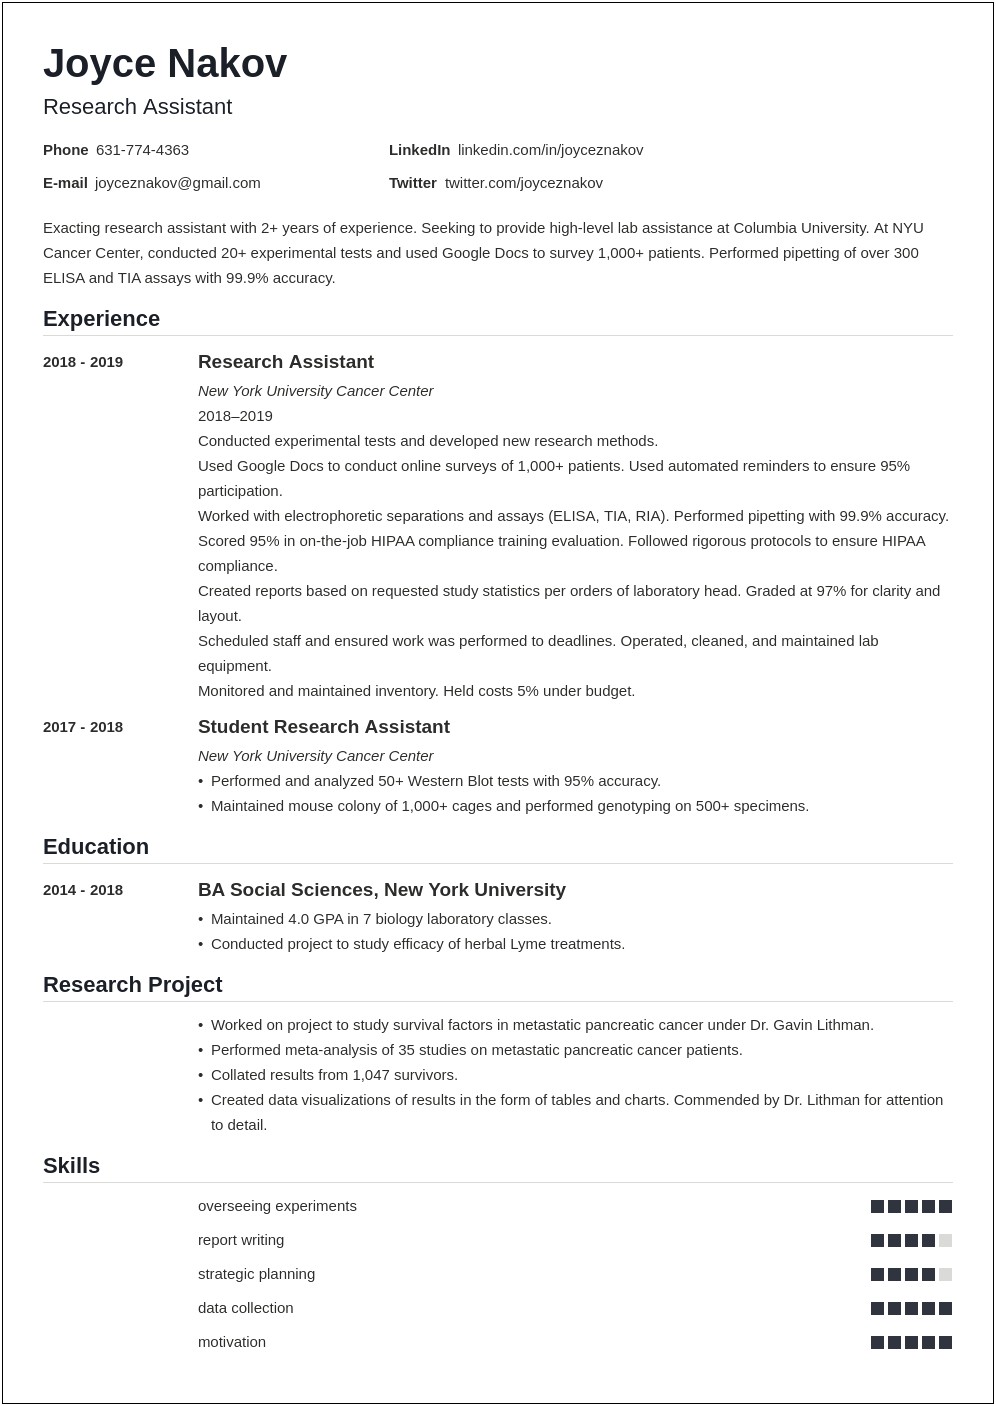 Resume Research Project You've Worked On